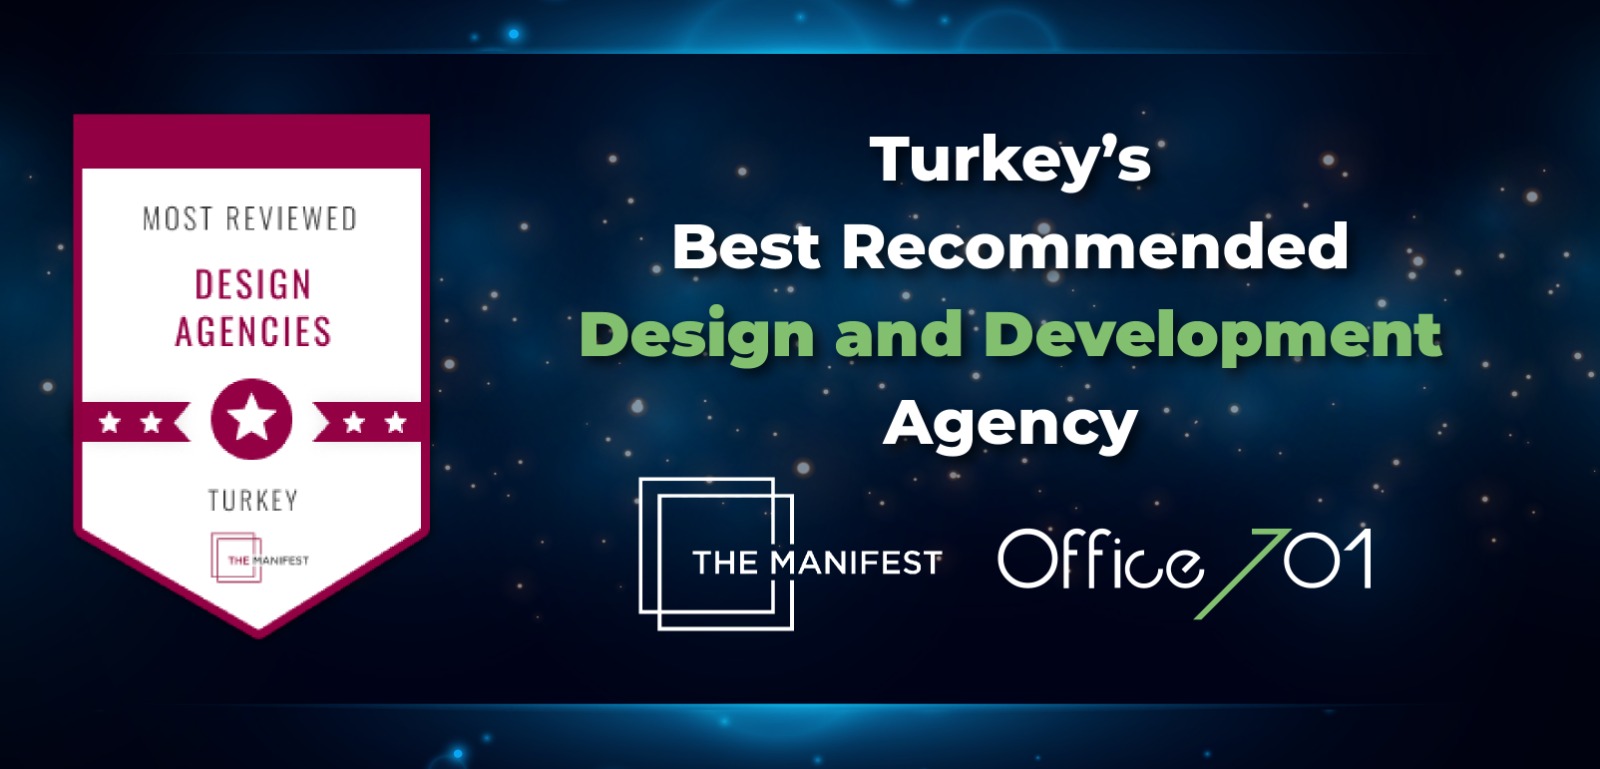 Office701 | Turkey’s Best Recommended Design and Development Agency